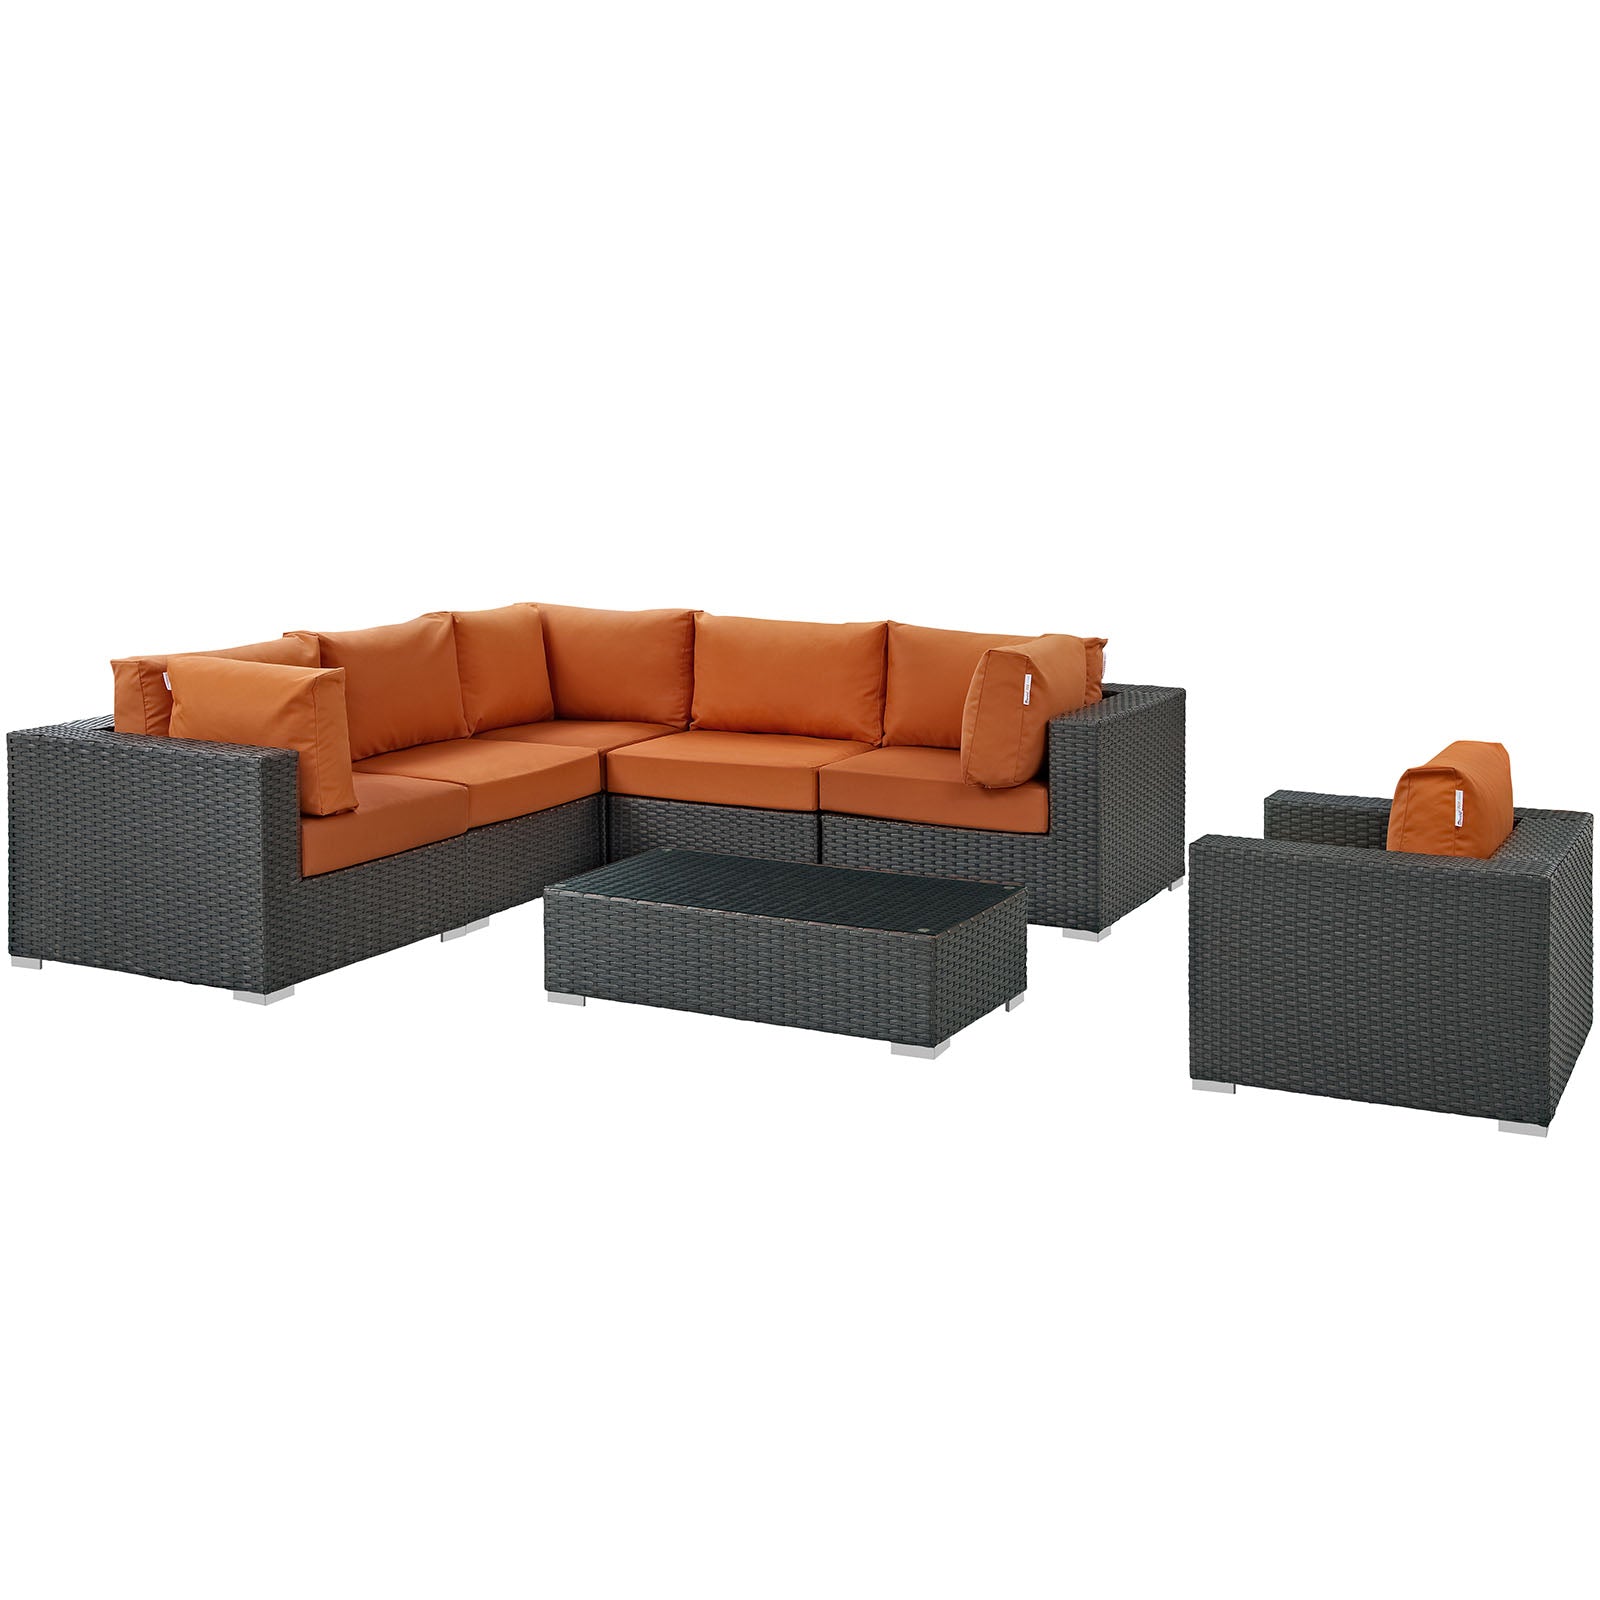 Modway Outdoor Conversation Sets - Sojourn 7 Piece Outdoor Patio 25"H Sectional Set Canvas Tuscan